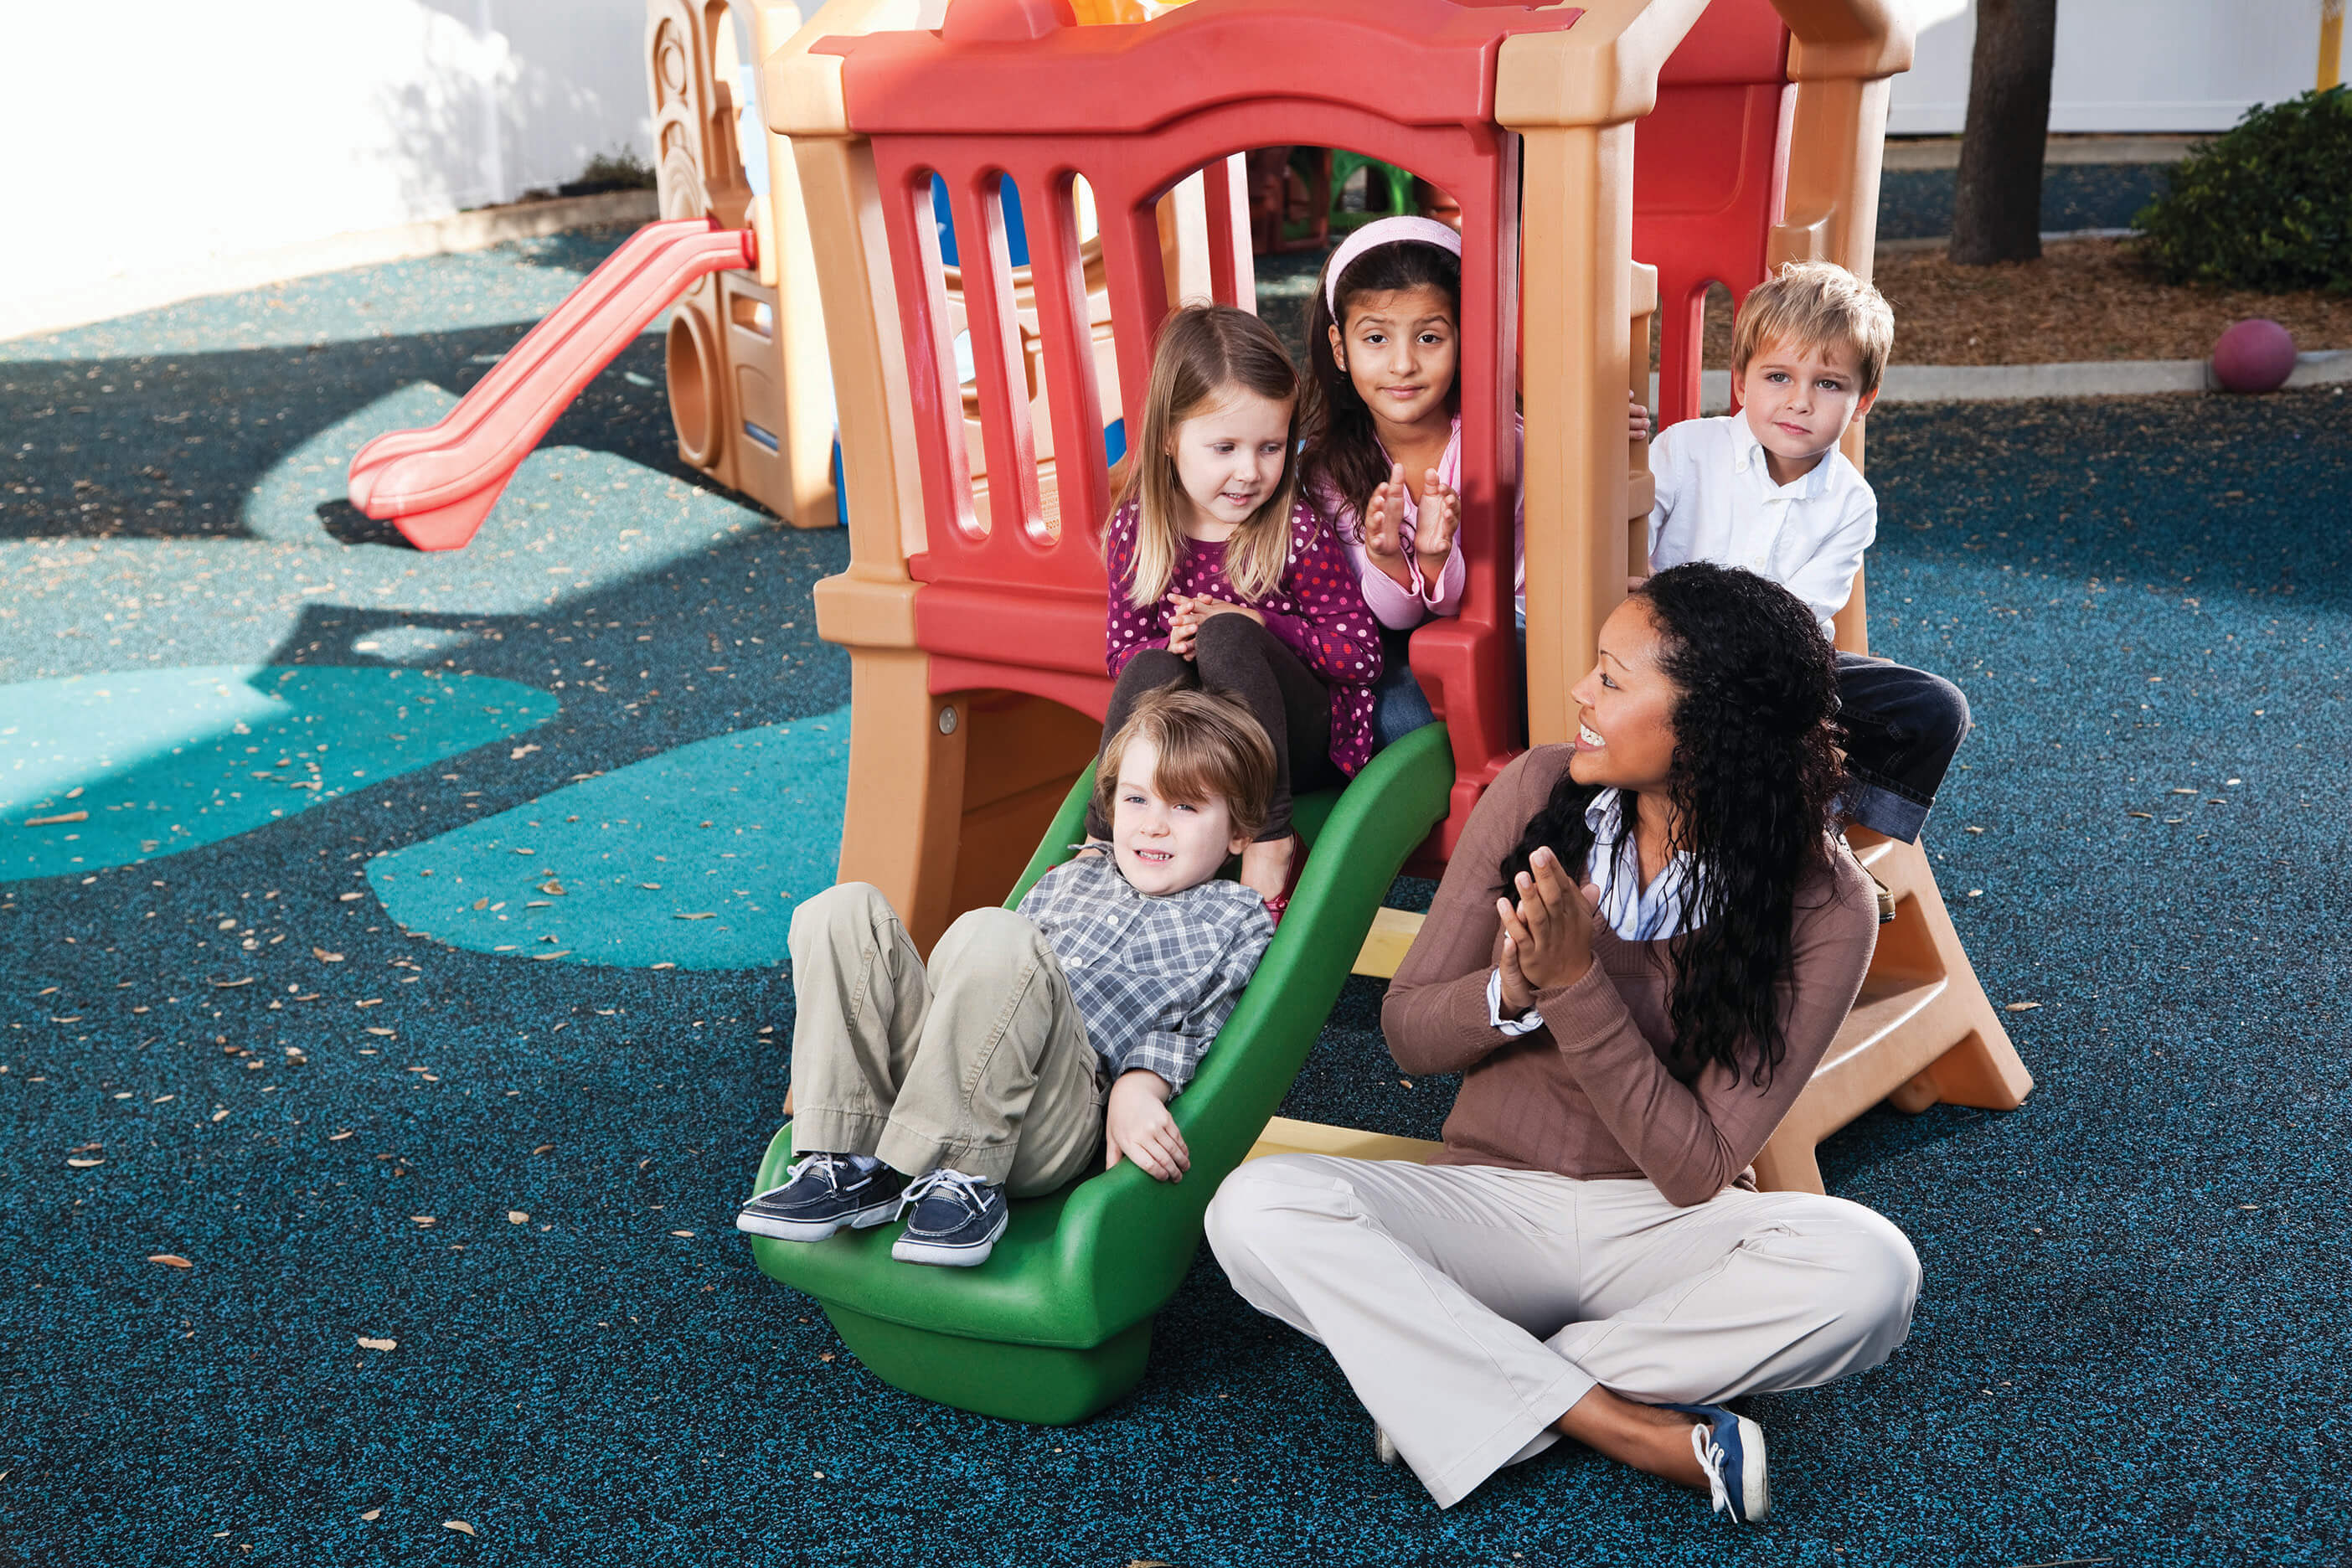 Four students and a teacher sitting on an outdoor play set